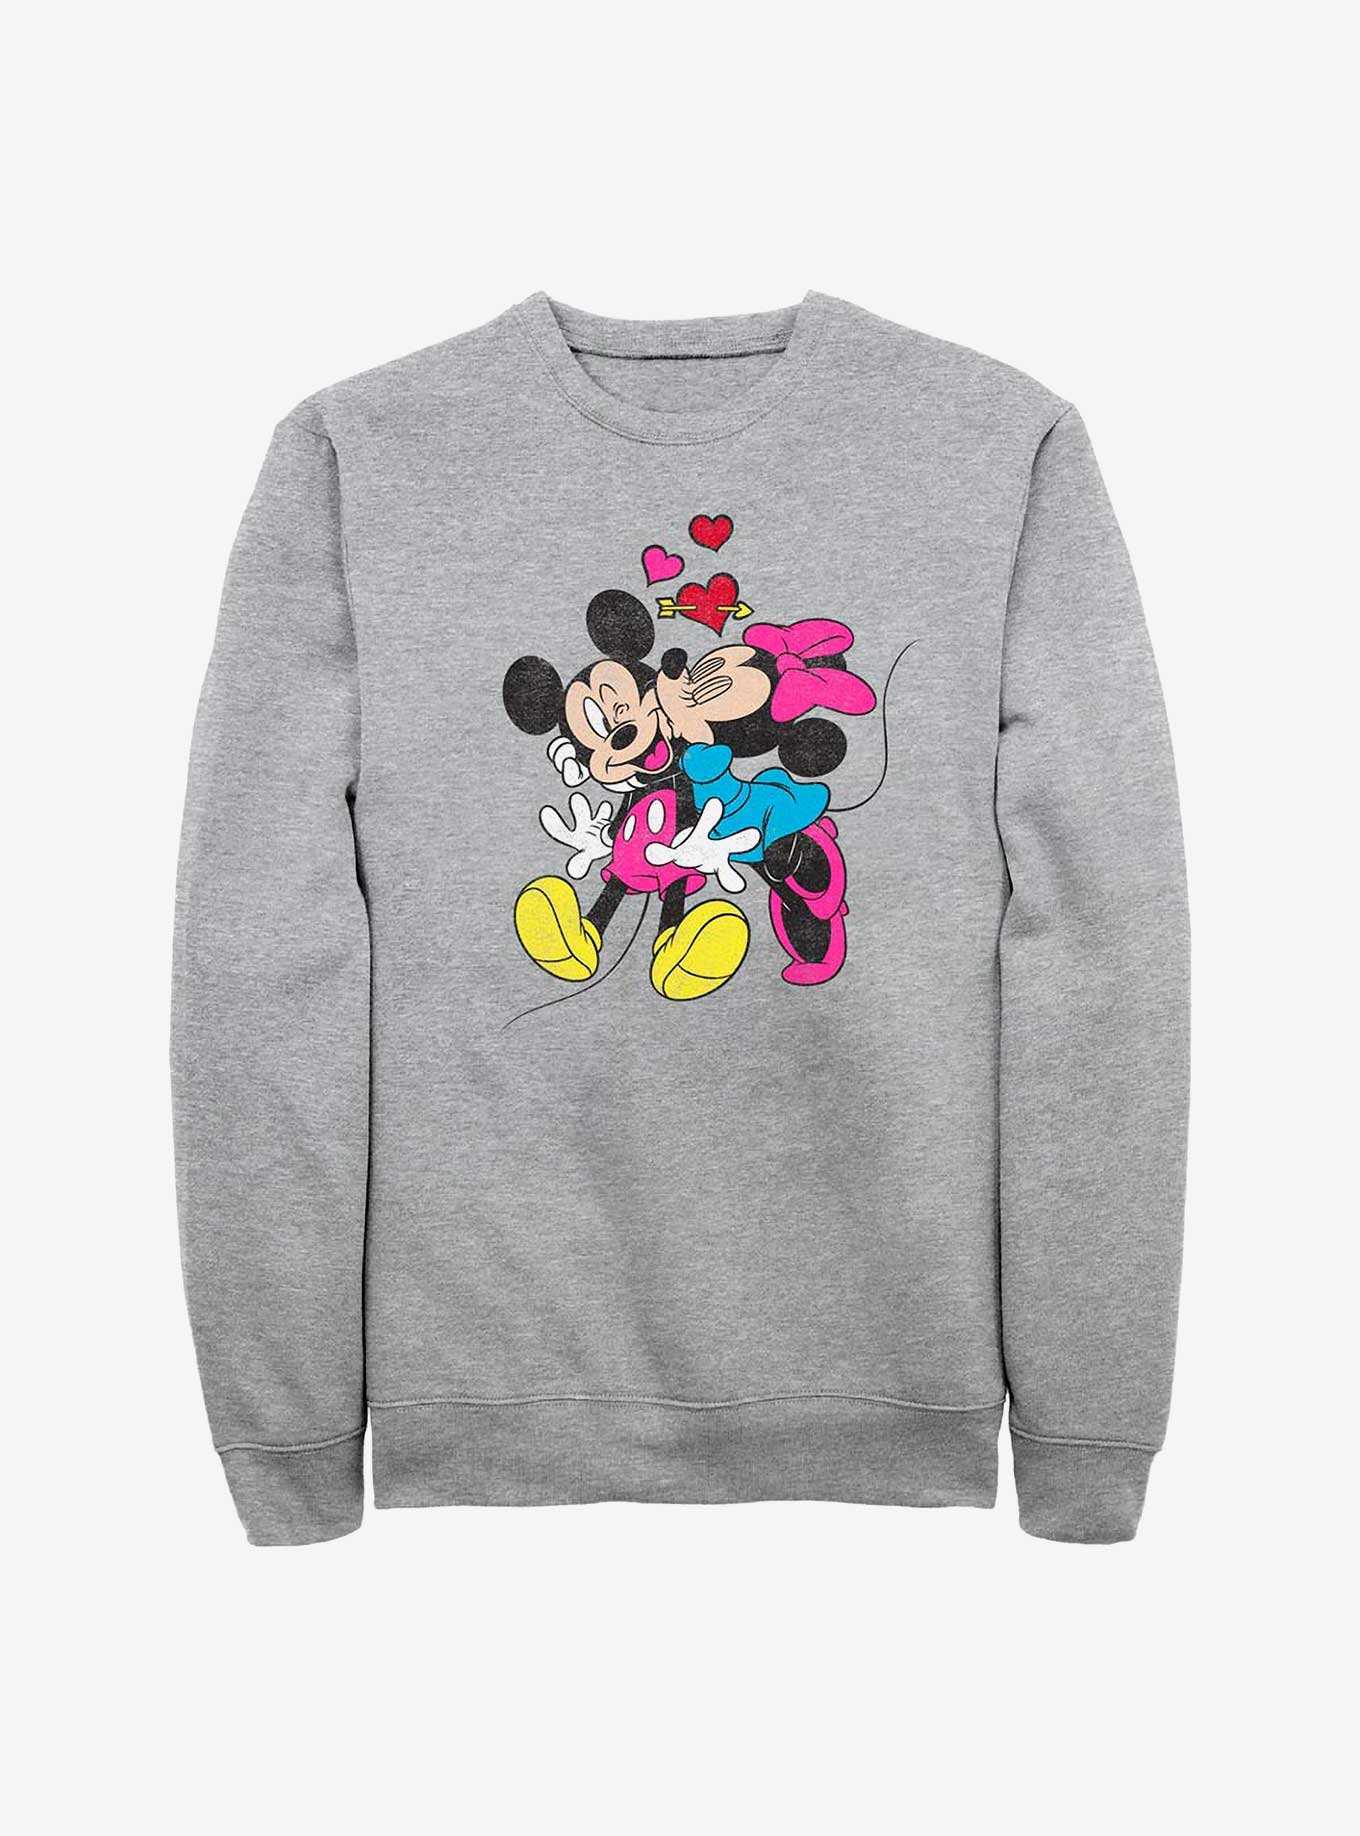 Disney Mickey Mouse & Minnie Mouse Love Sweatshirt, , hi-res